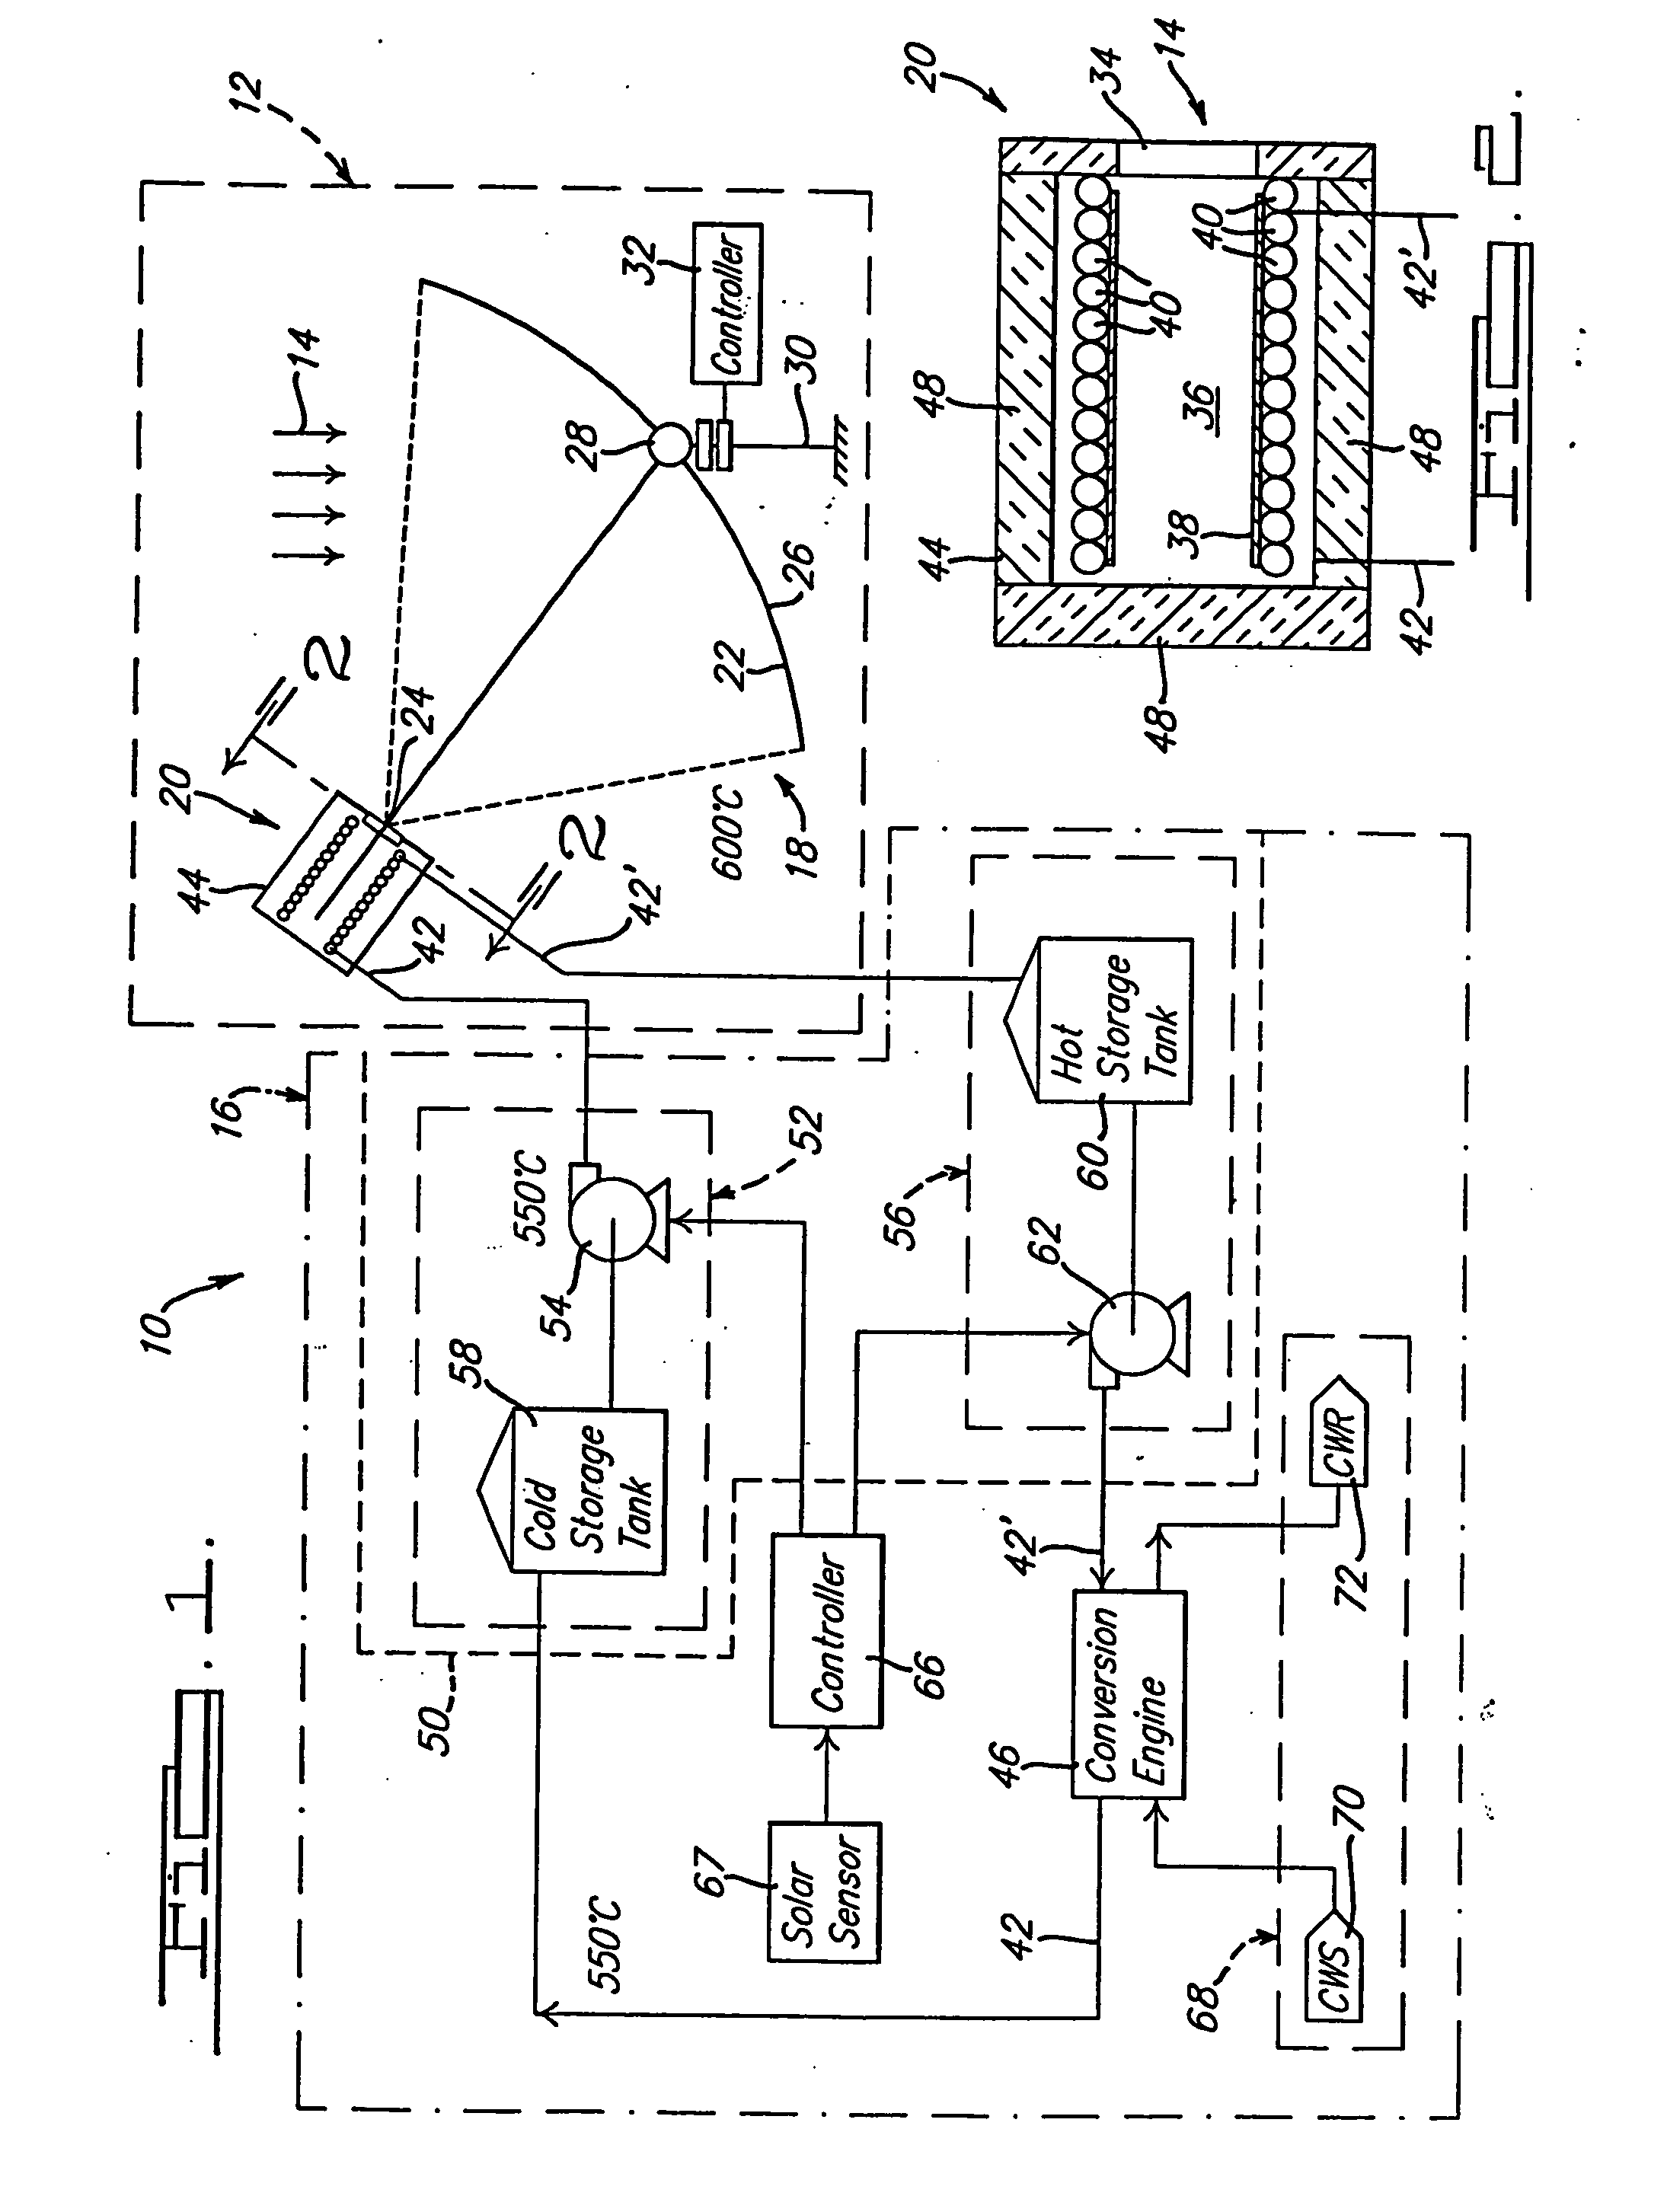 Solar dish concentrator with a molten salt receiver incorporating thermal energy storage